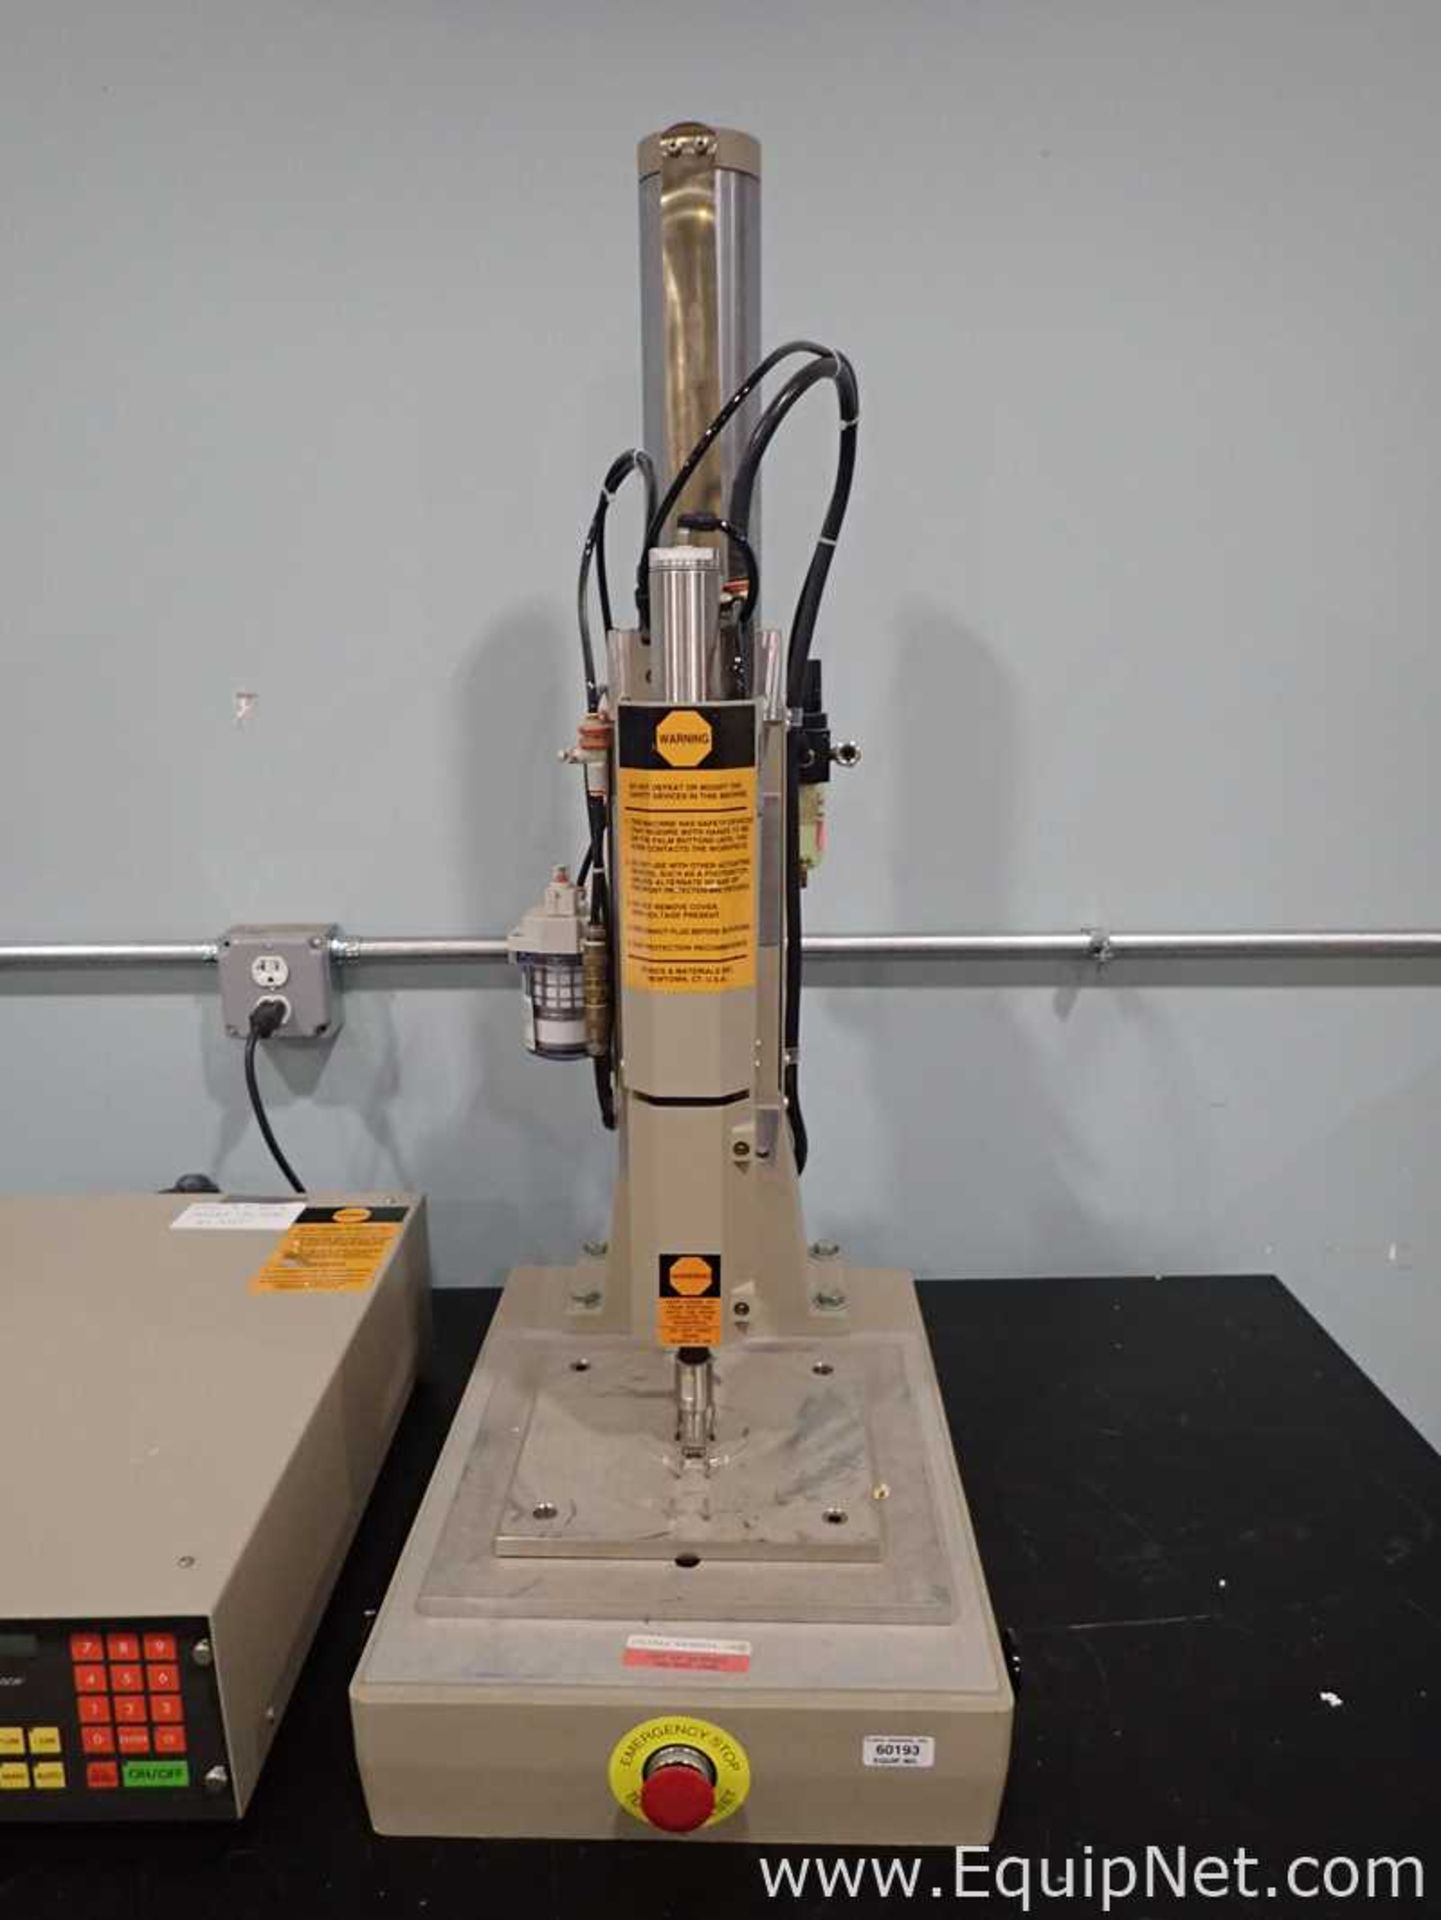 Sonics and Materials 4095 Pneumatic Press with Microsonic Processor for Ultrasonic Plastic Assembly - Image 2 of 10